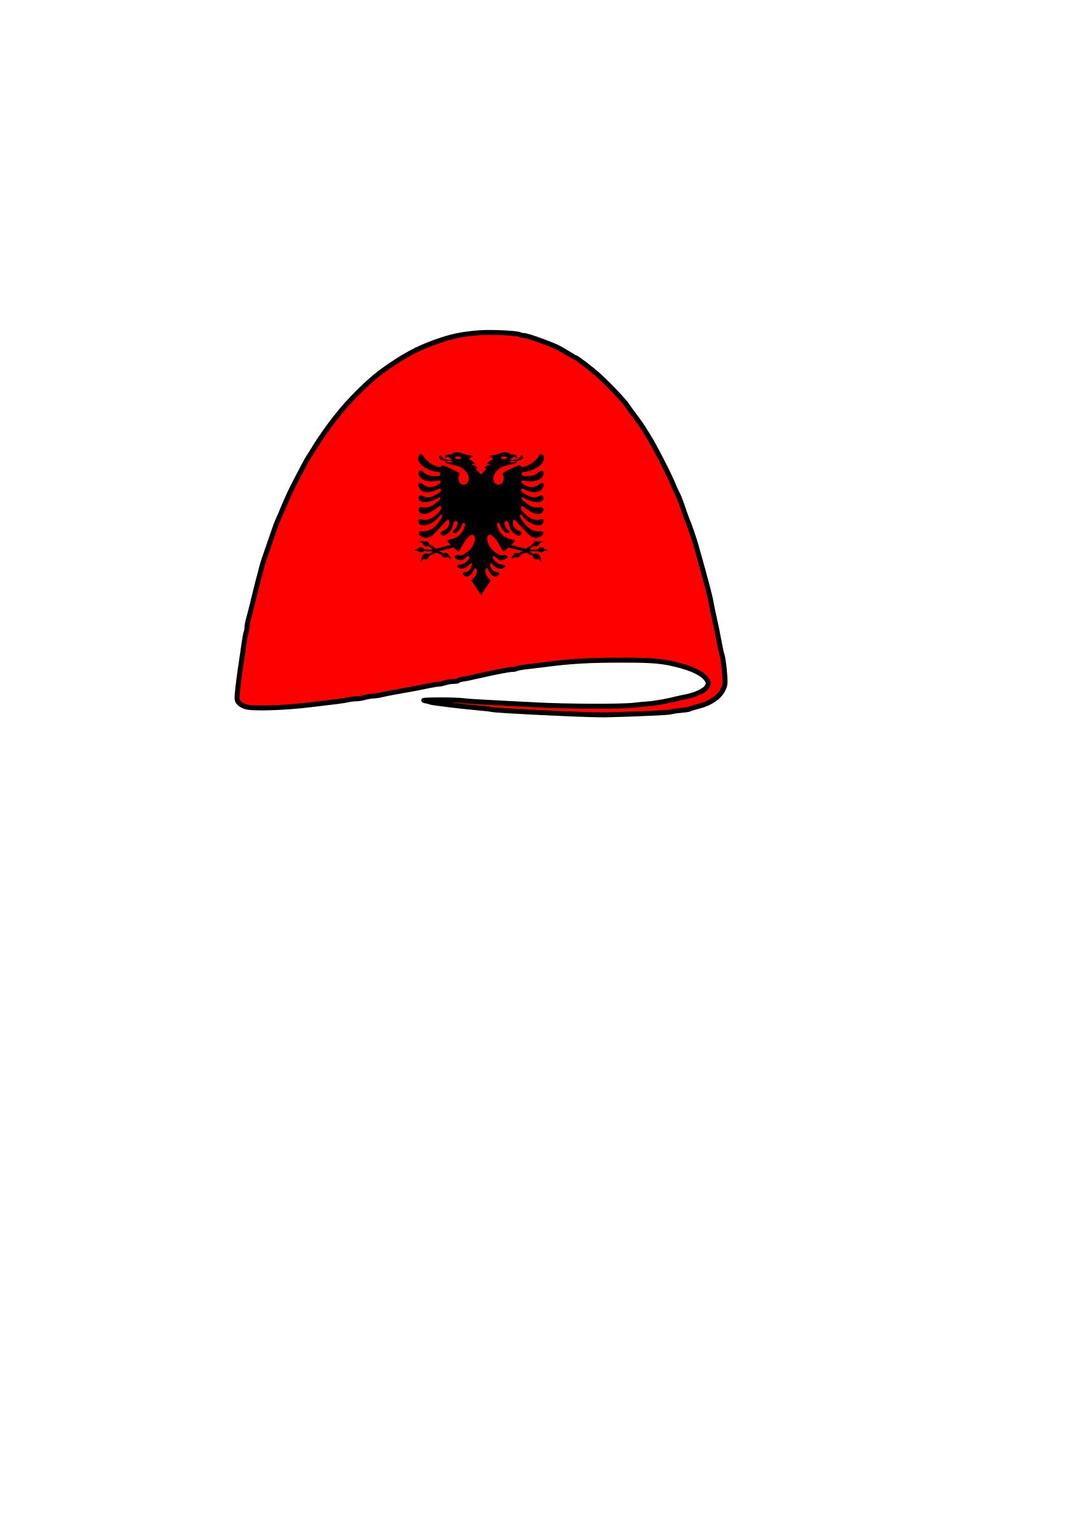 Plisi - red and black png transparent